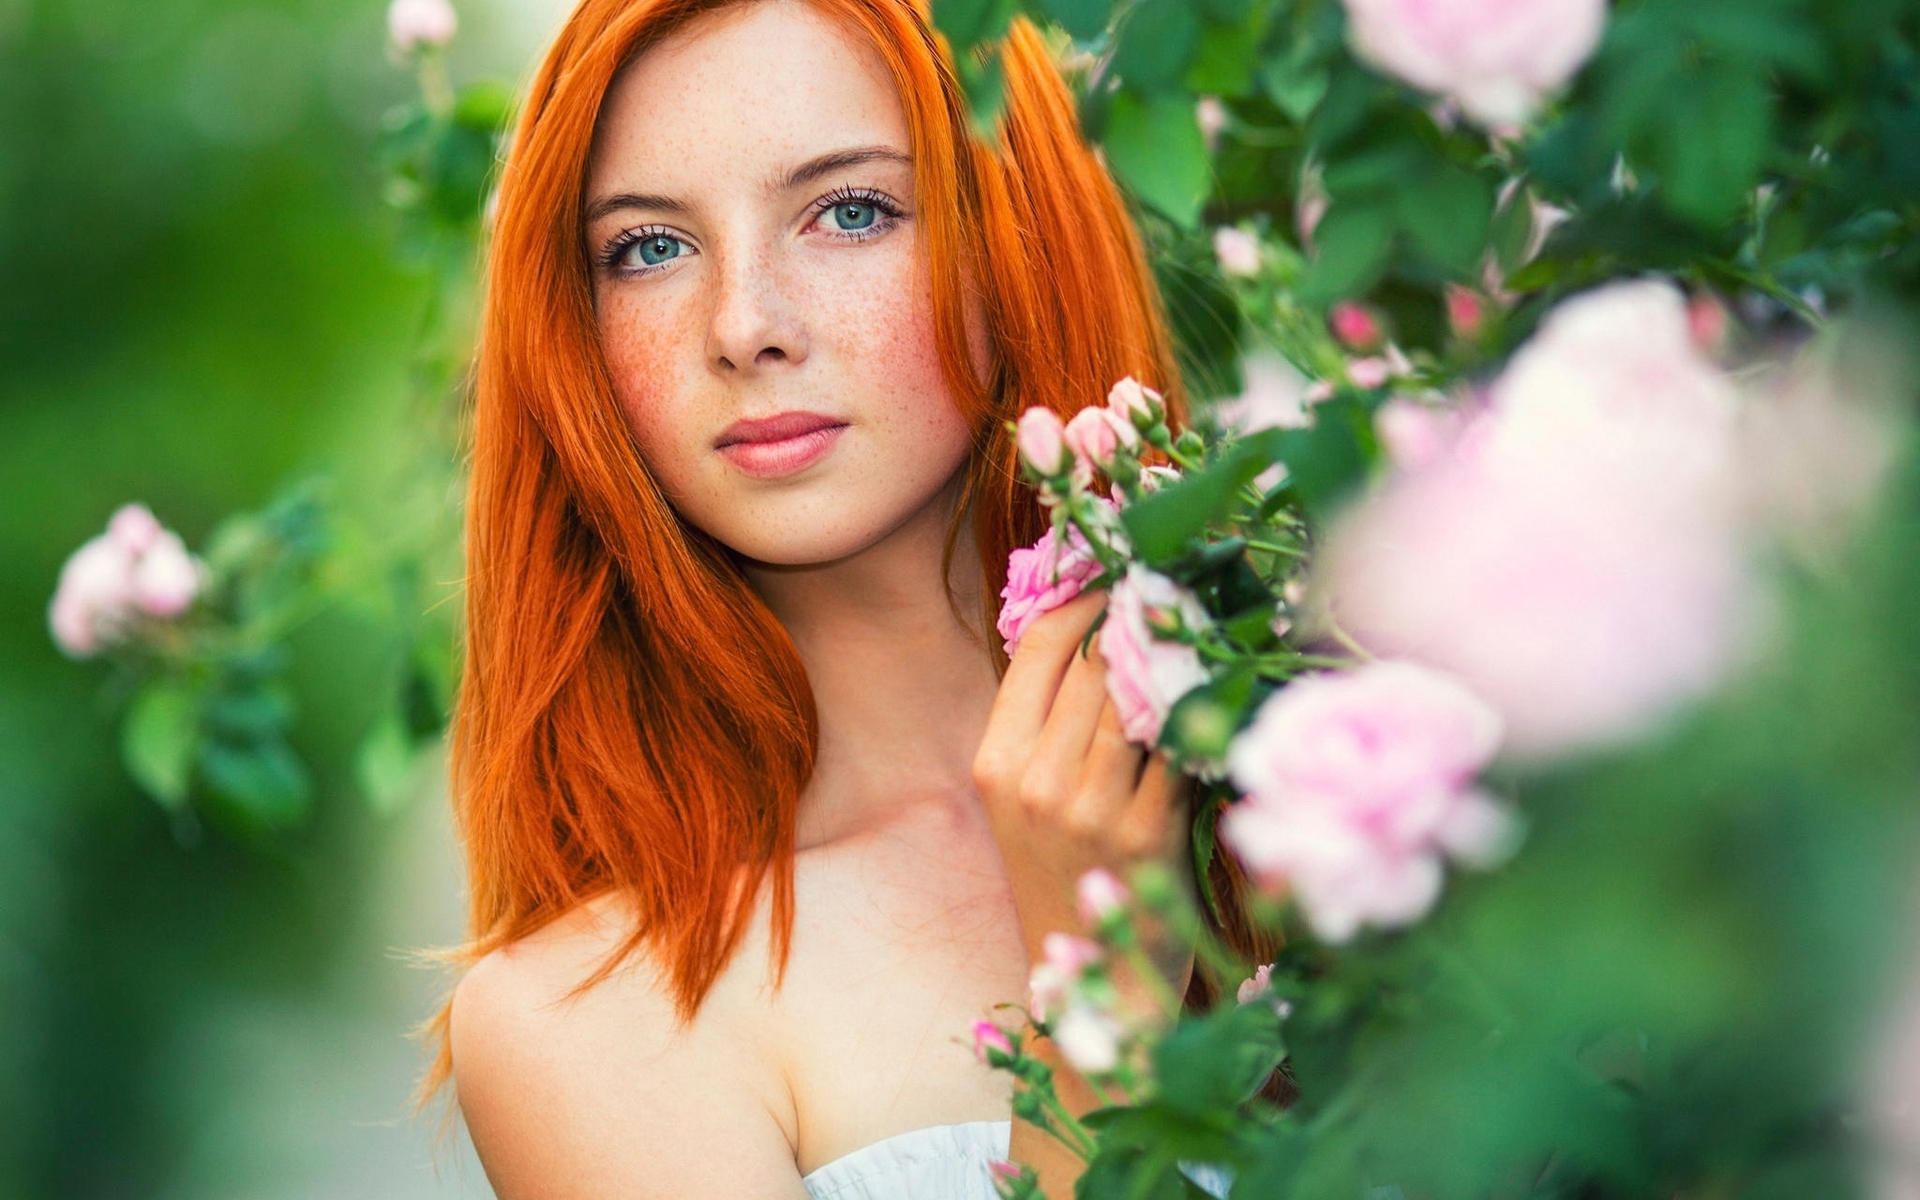 Image: Girl, face, freckles, eyes, makeup, hair, red, flowers